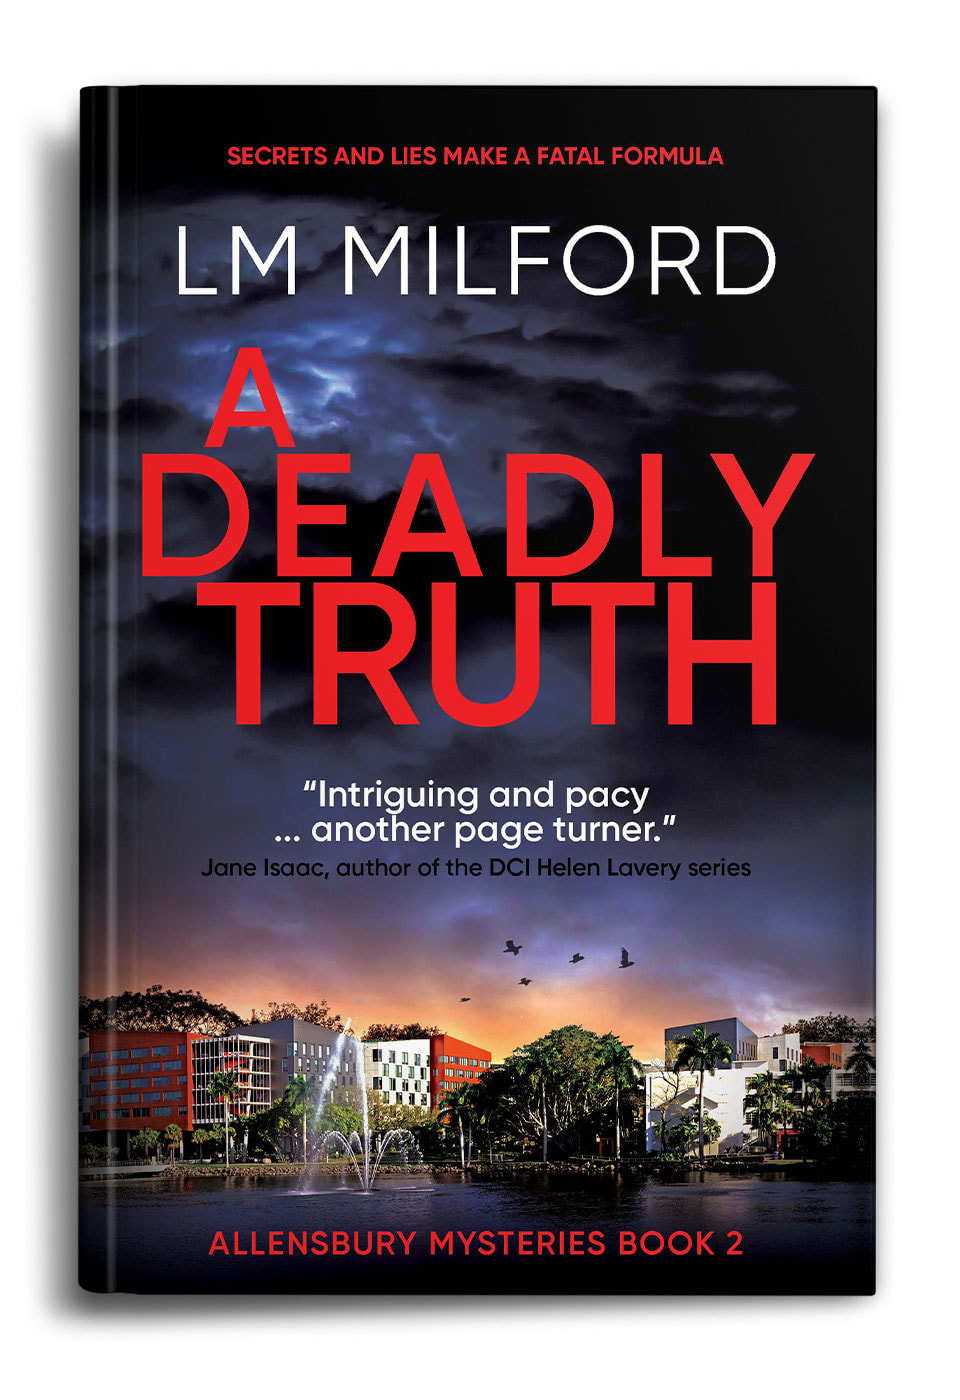 A Deadly Truth by LM Milford